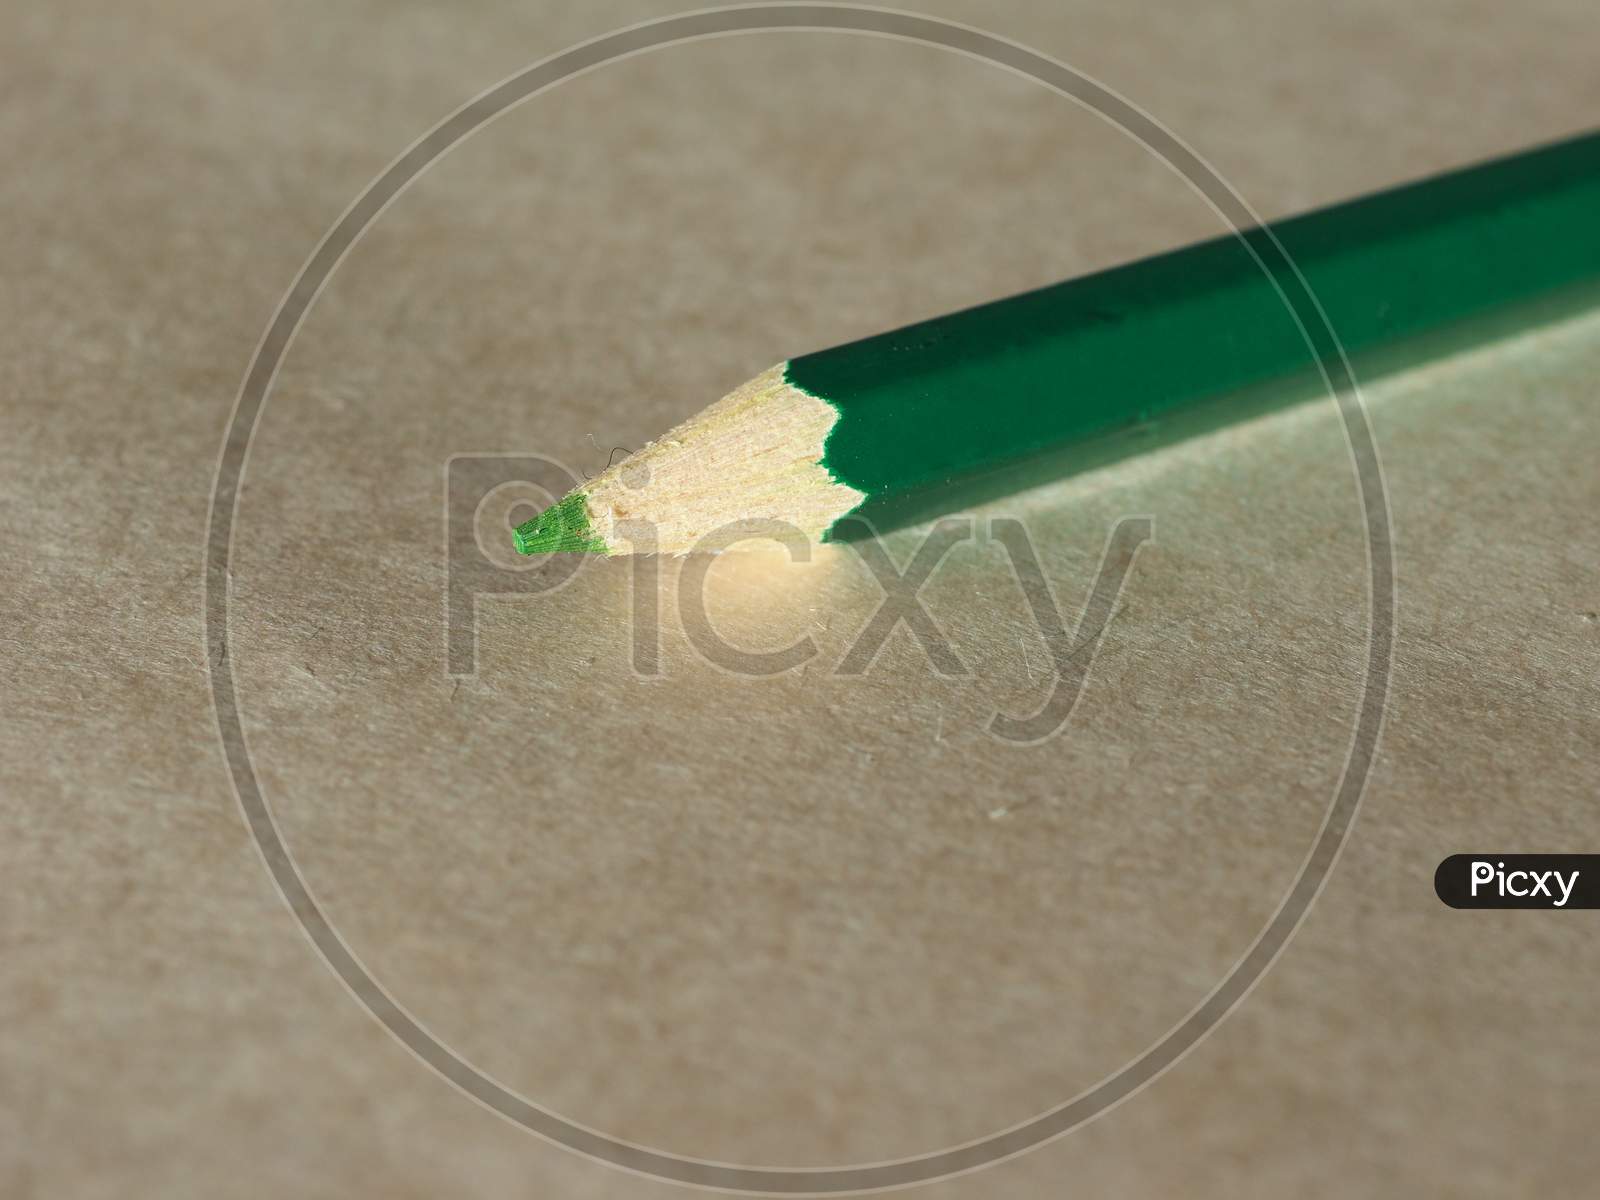 Green Pencil Over Paper